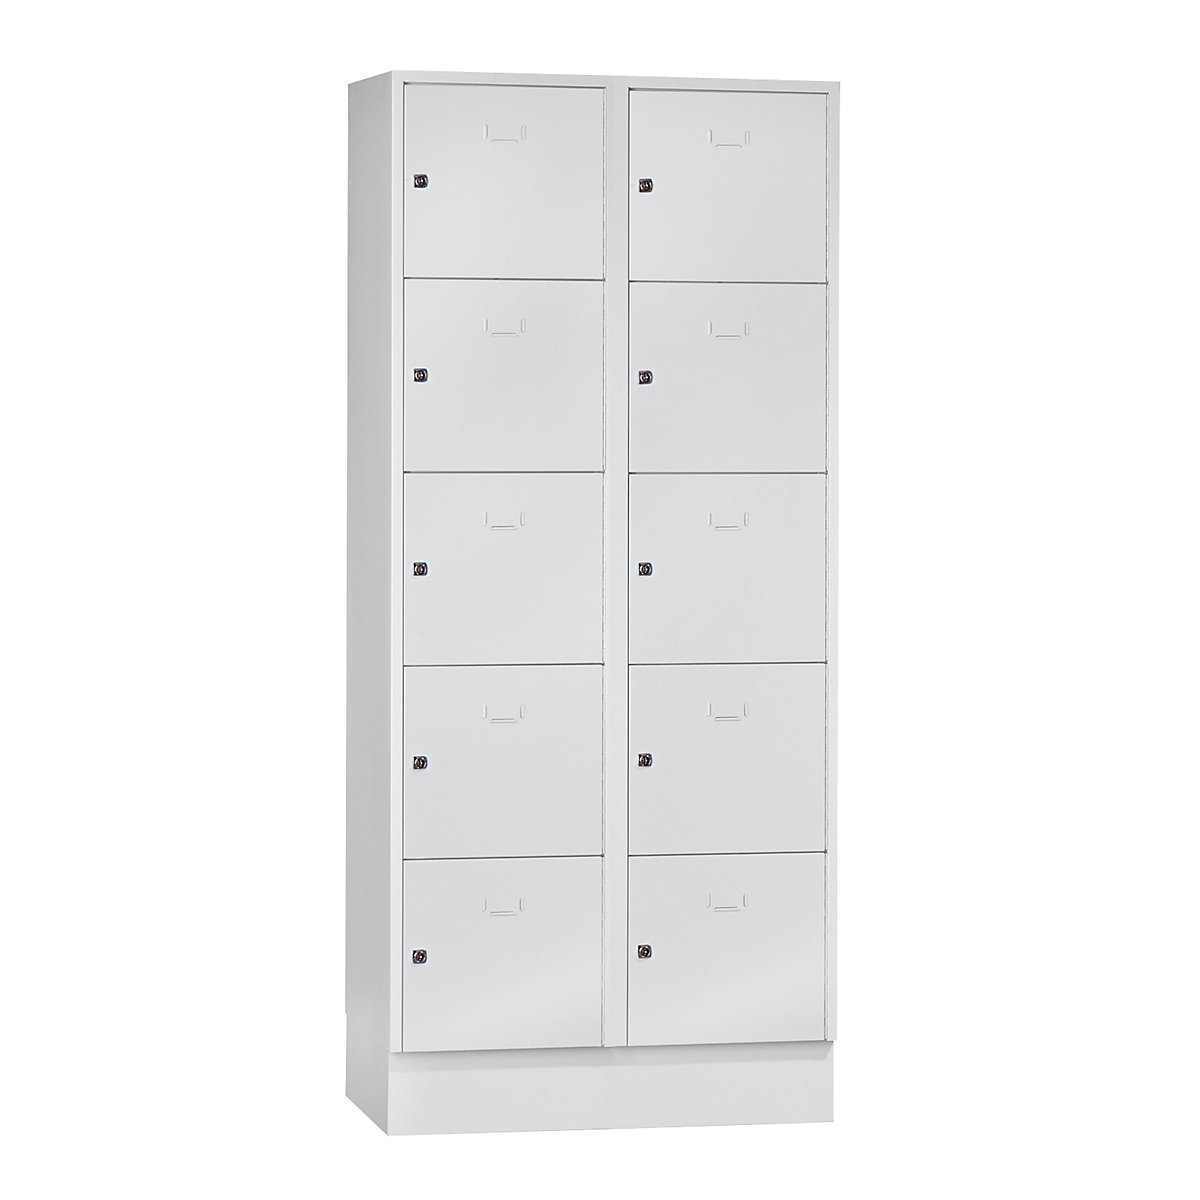 Cloakroom locker system – Wolf, 10 compartments, compartment width 400 mm, light grey / light grey-4